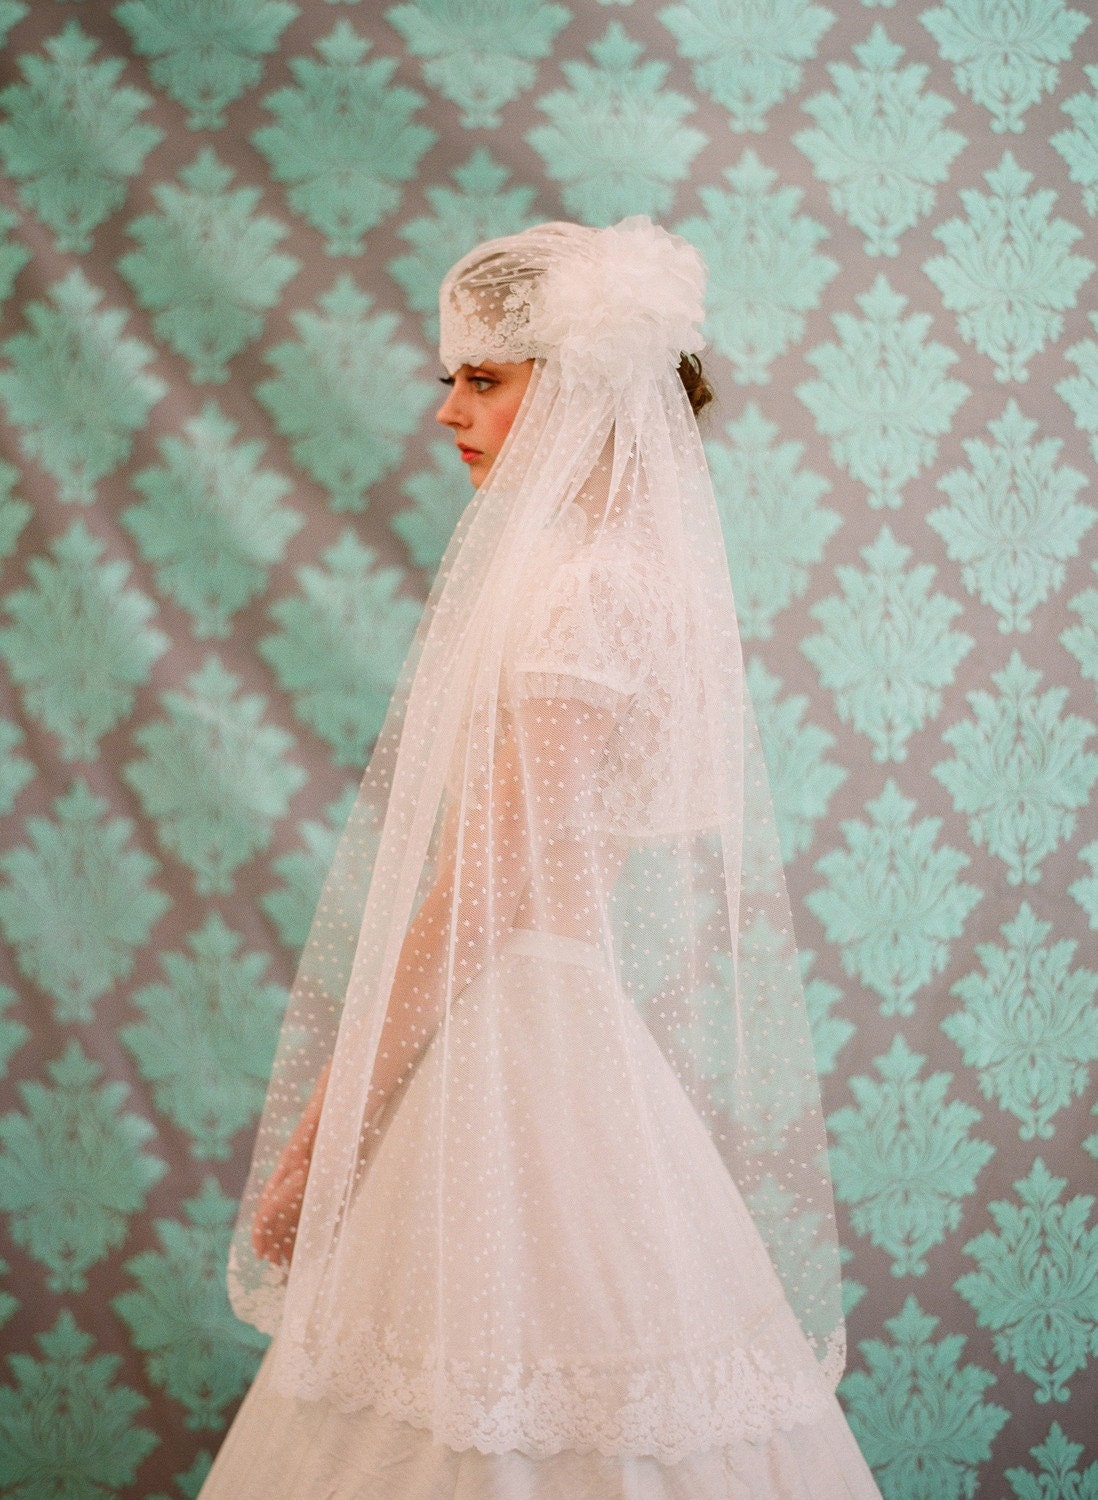 Bridal lace cap with veil, french and vintage inspired - Style 103 - Made to Order